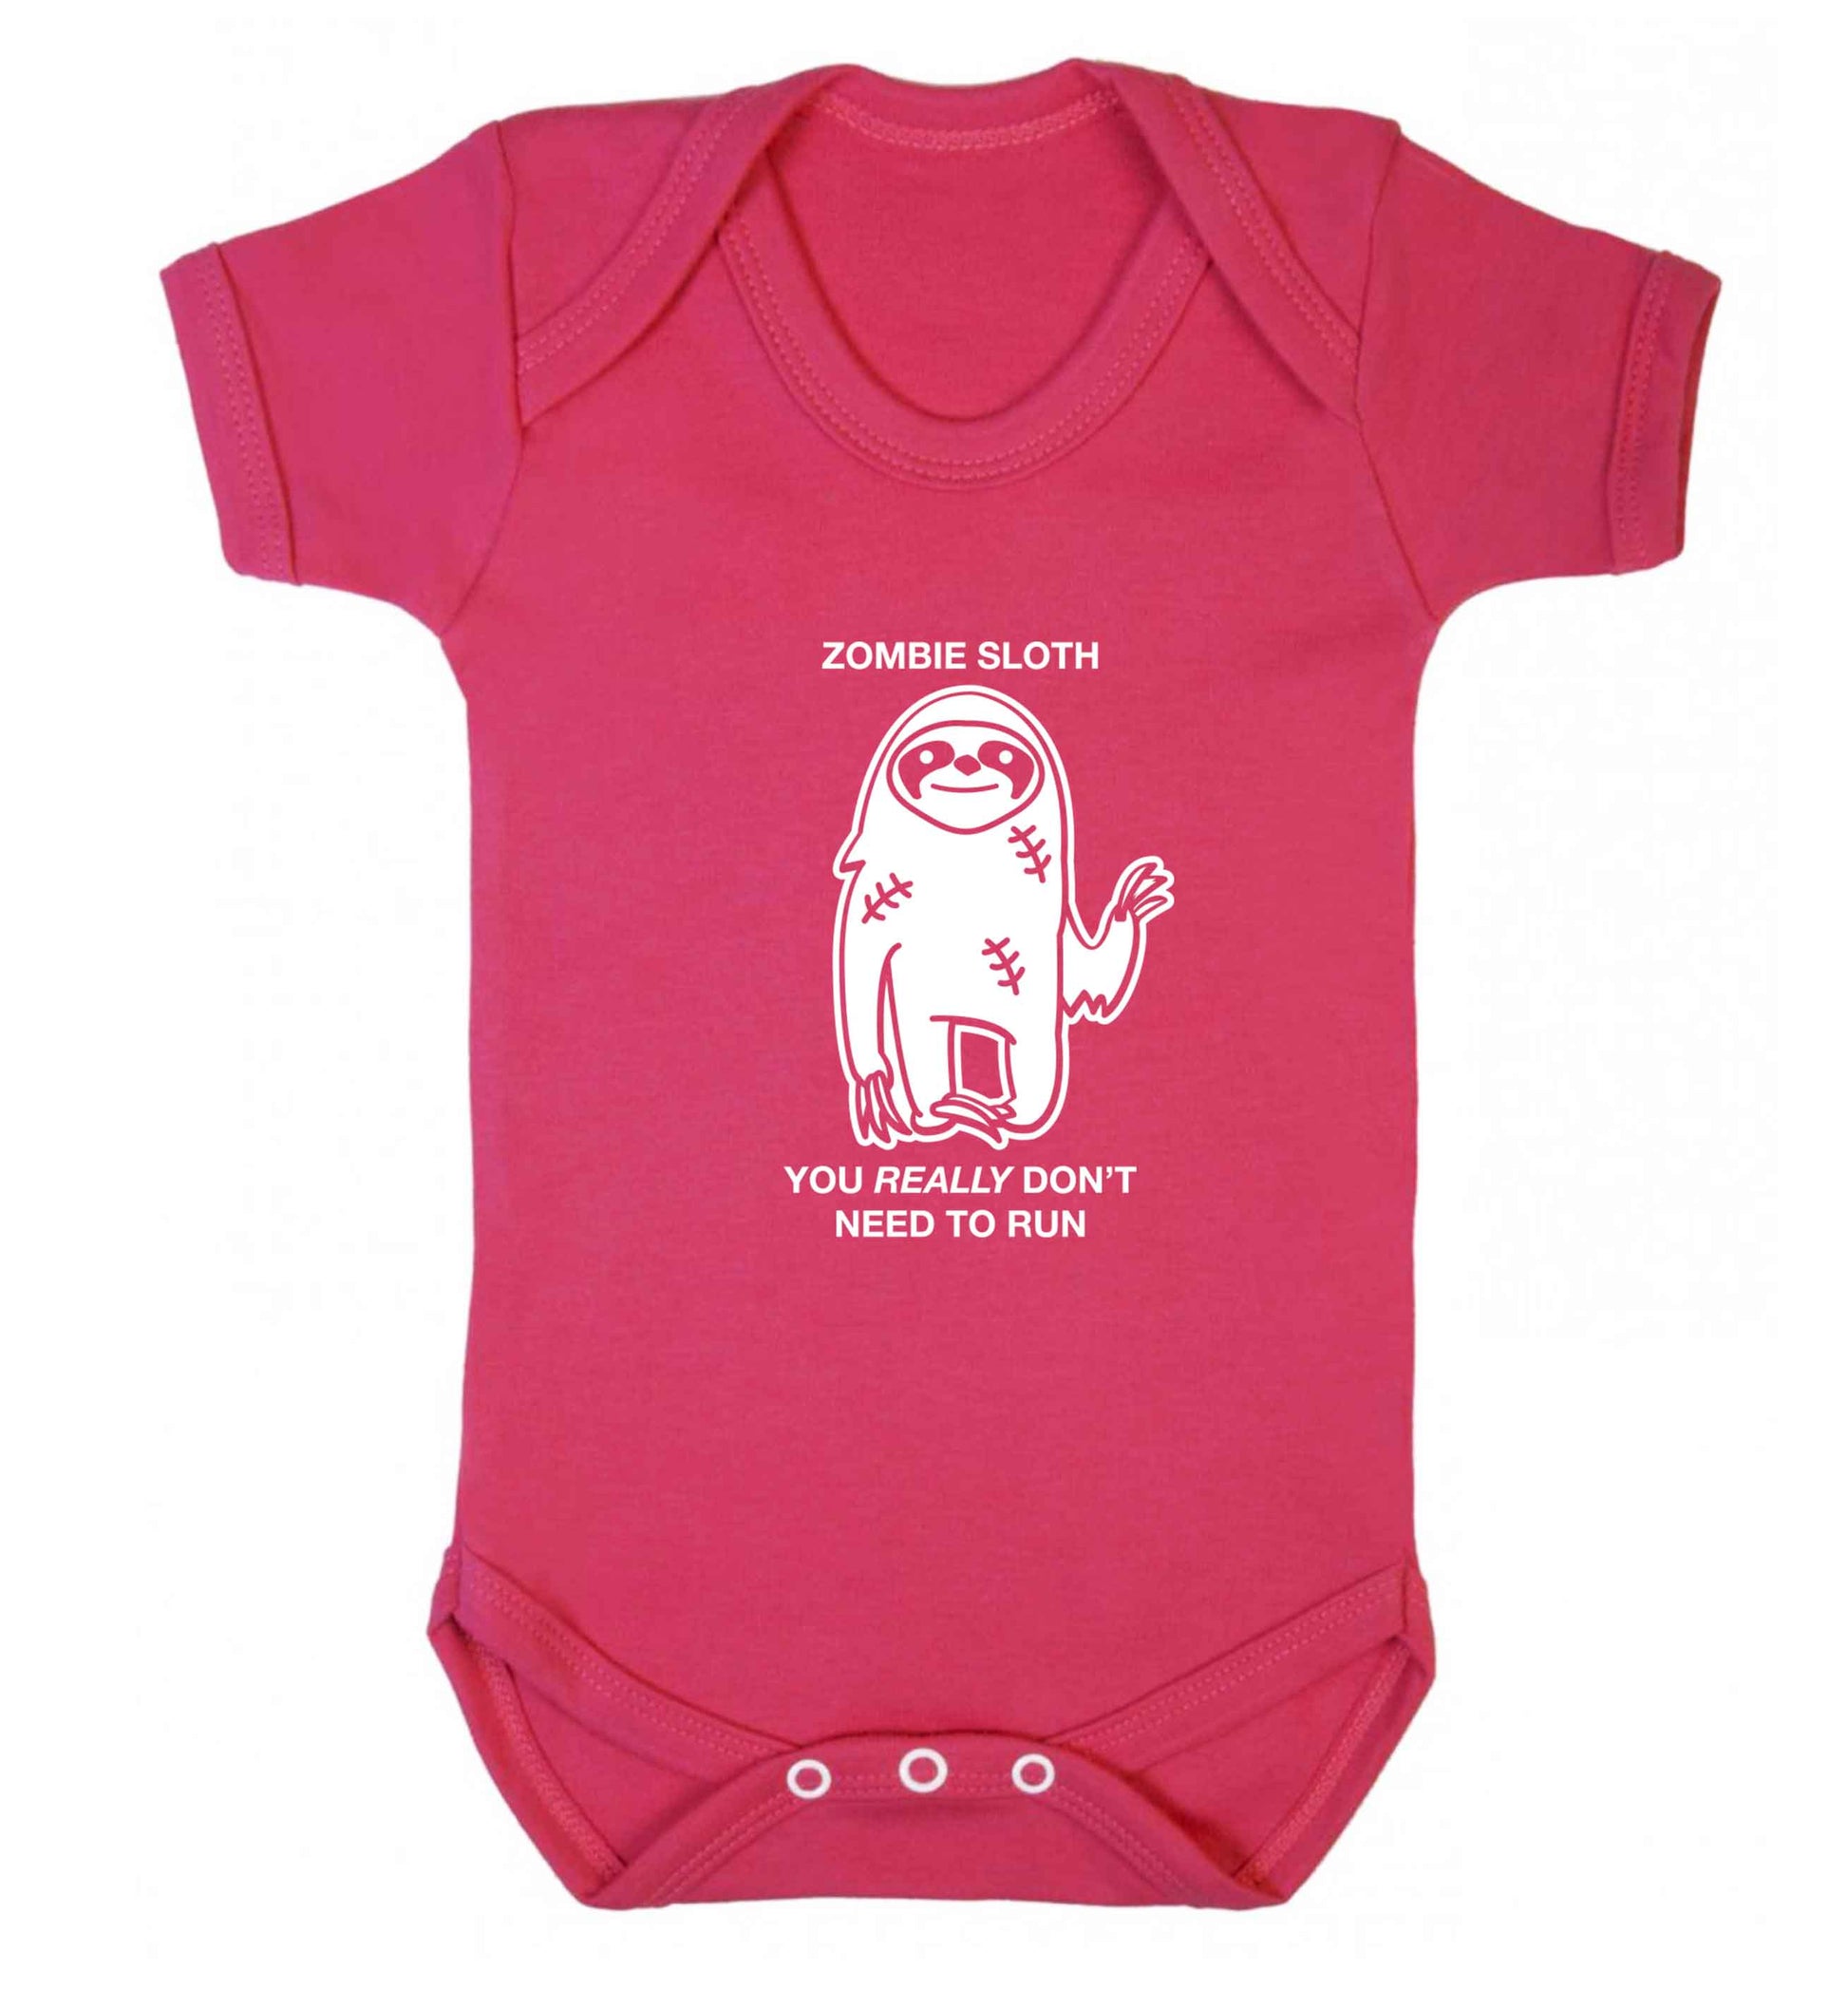 Zombie sloth you really don't need to run baby vest dark pink 18-24 months